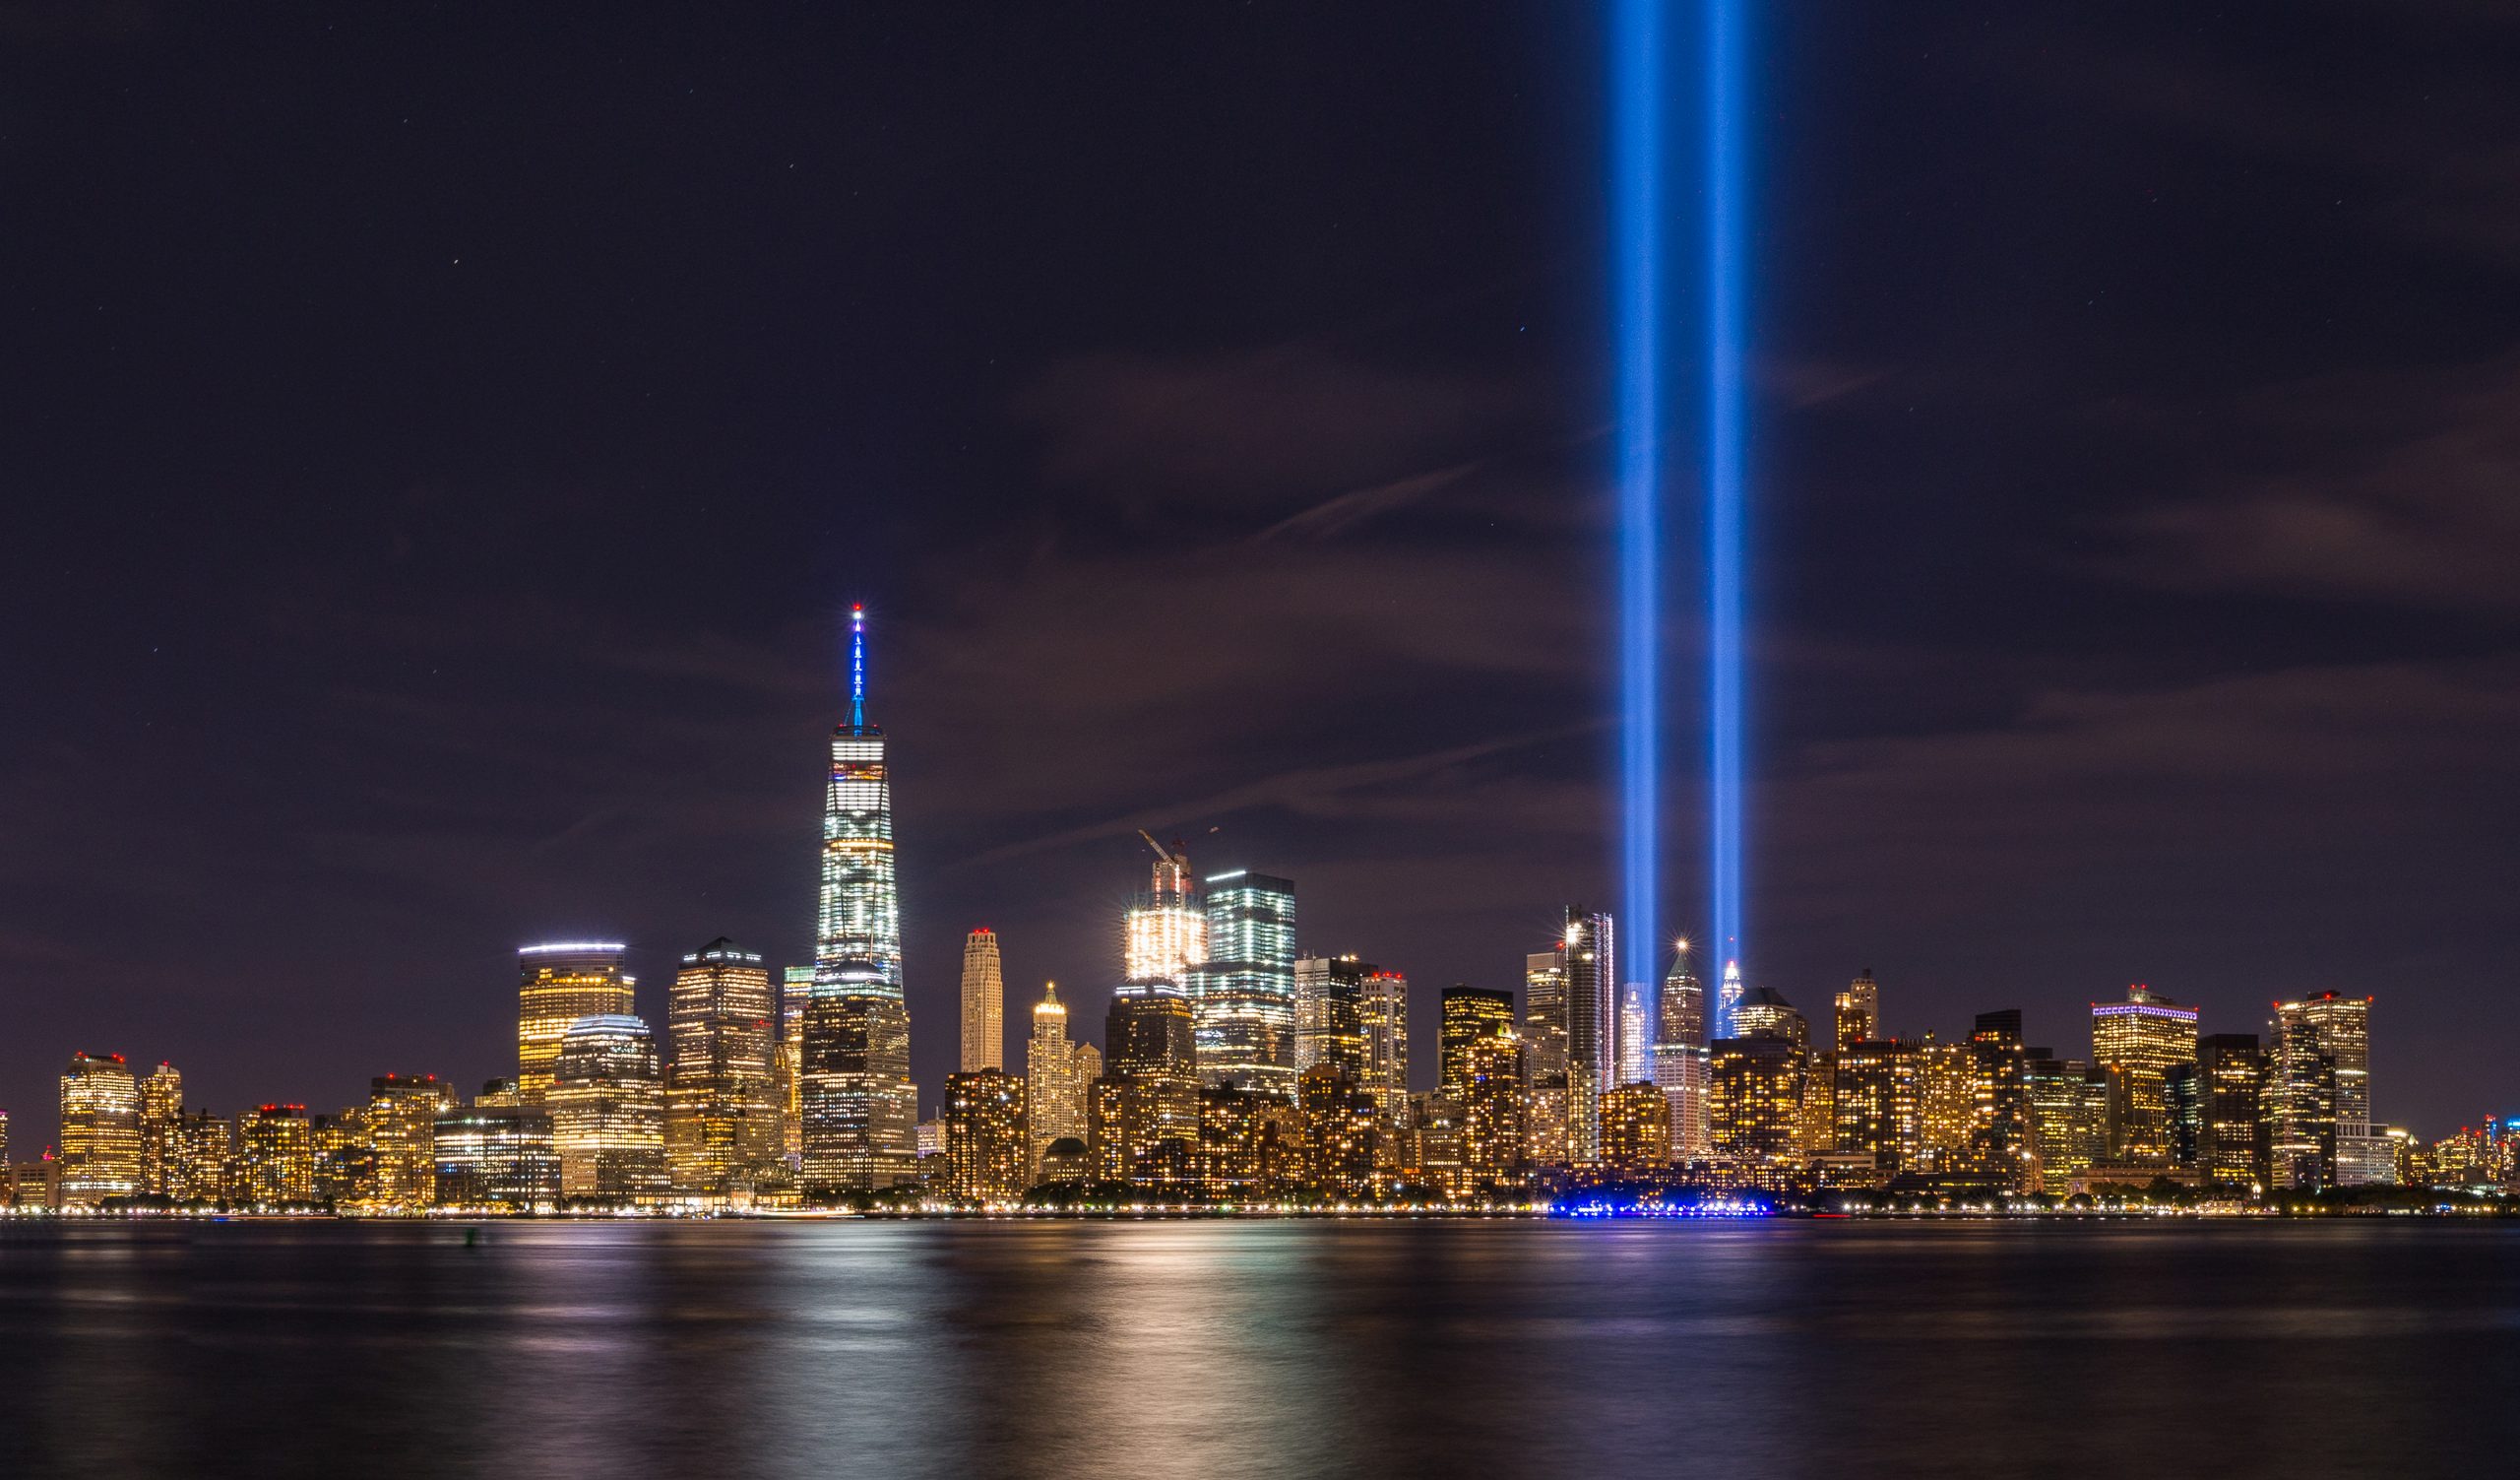 Darkness on 9/11 Tribute in Light cancellation adds to a more somber